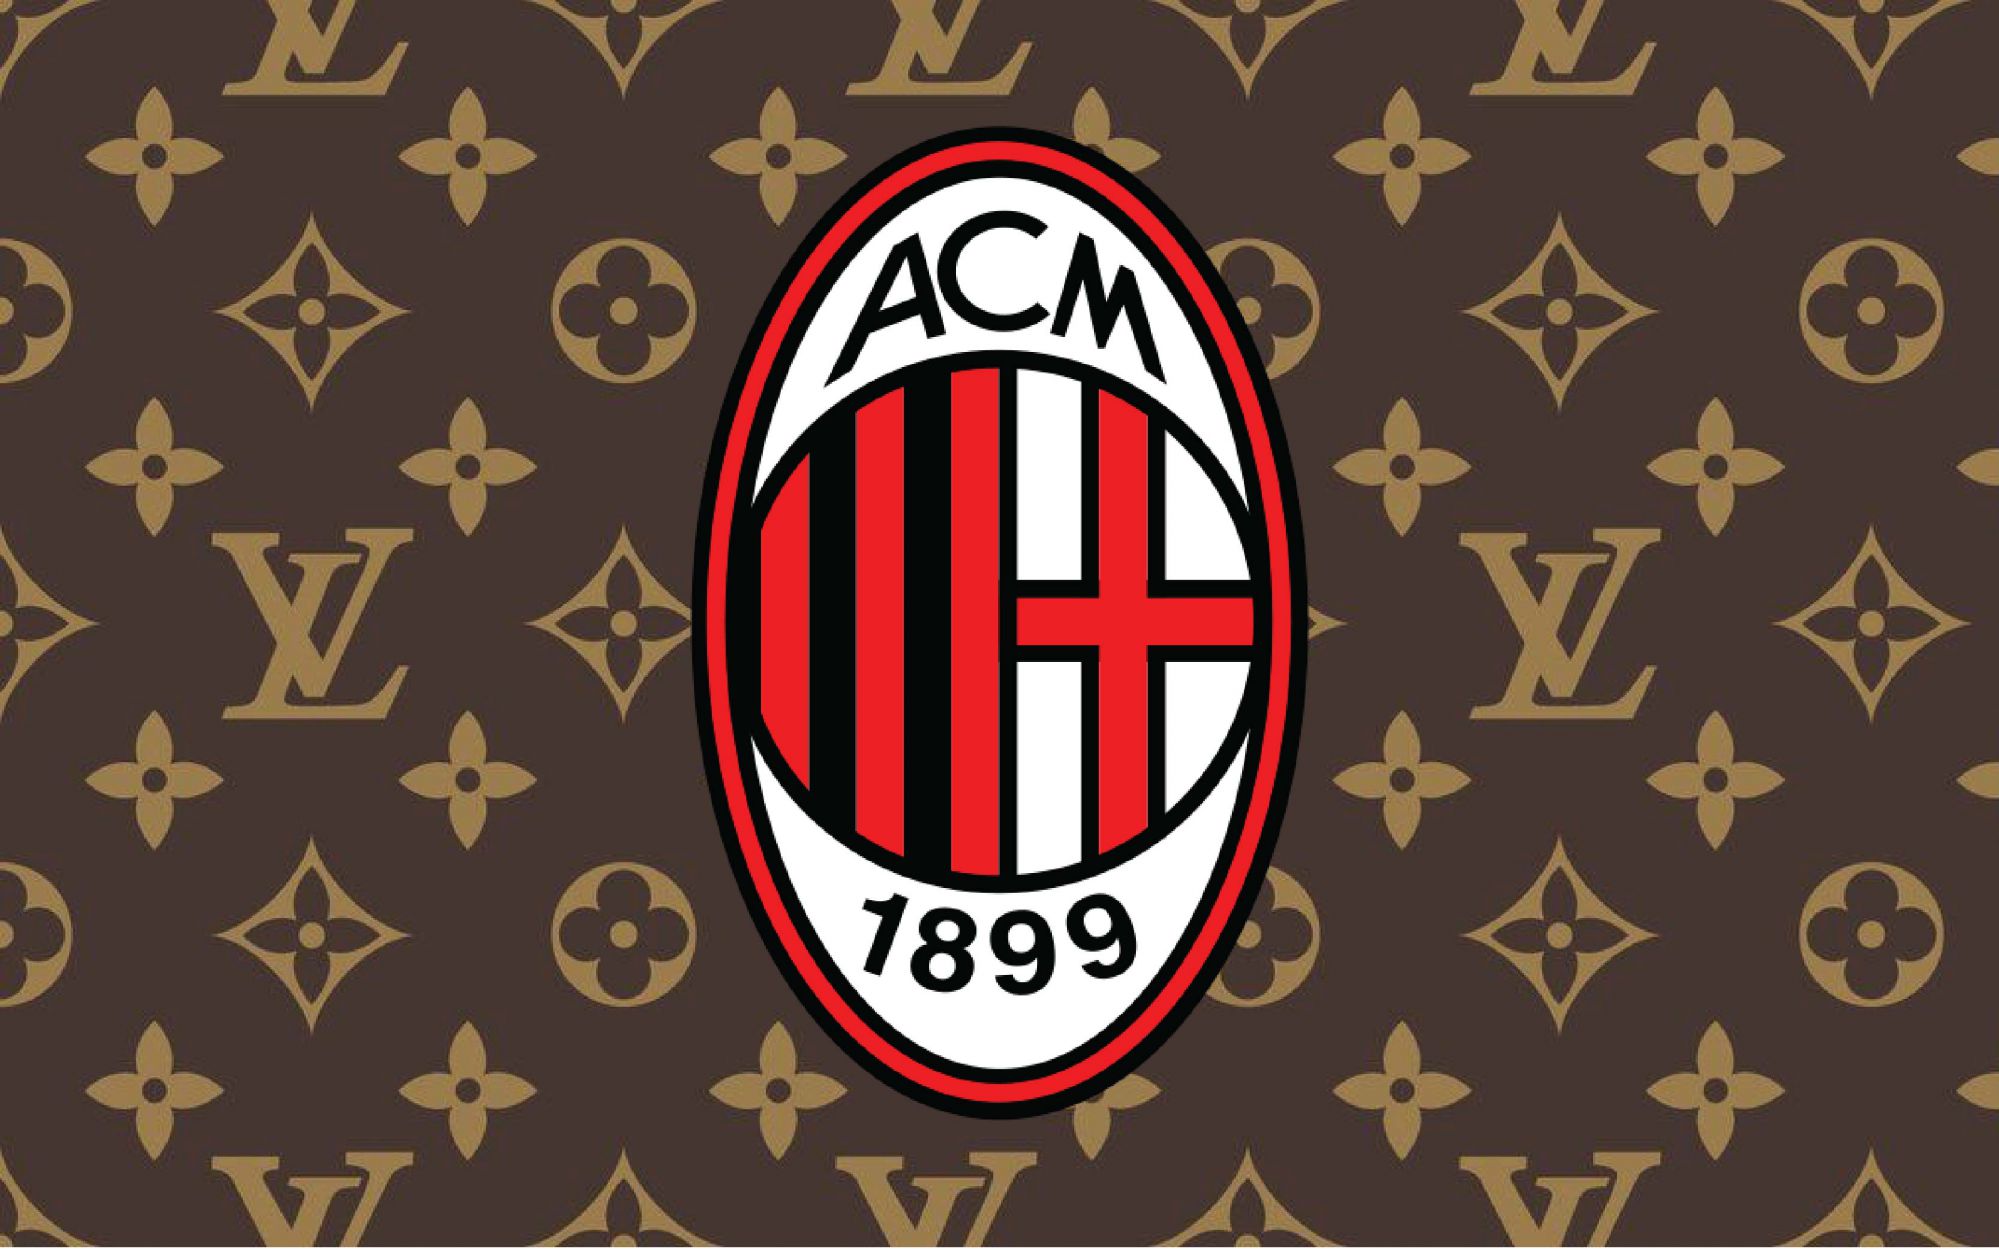 Louis Vuitton would be interested in buying AC Milan